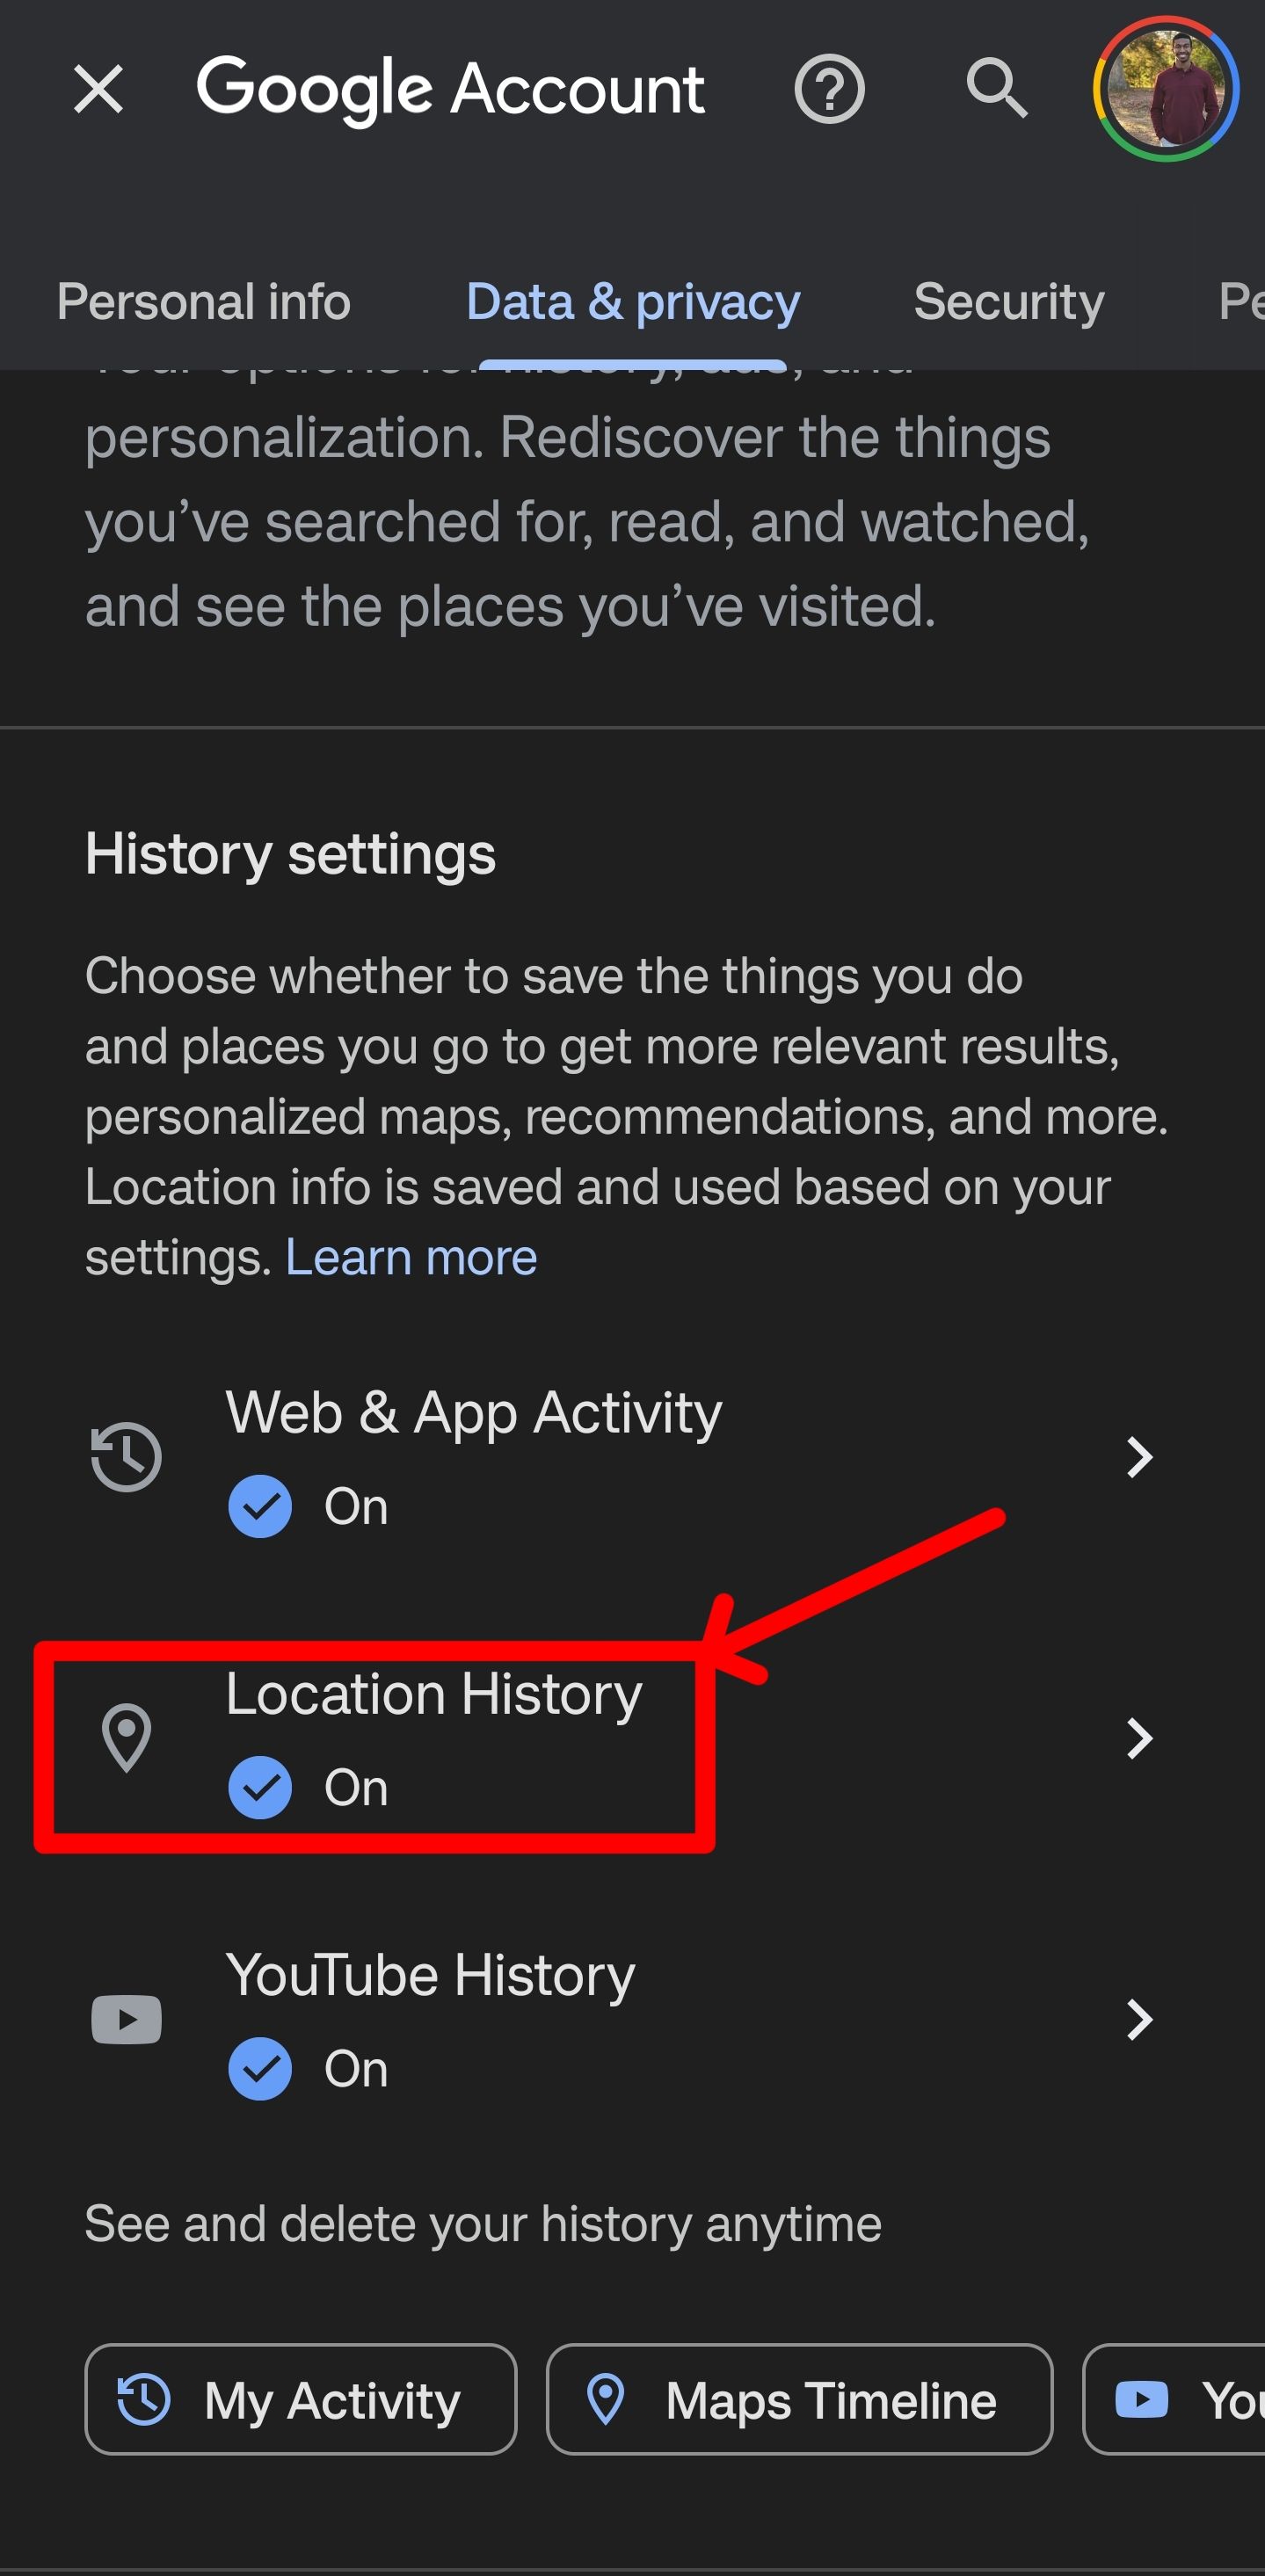 Select location history to access the information under your account.